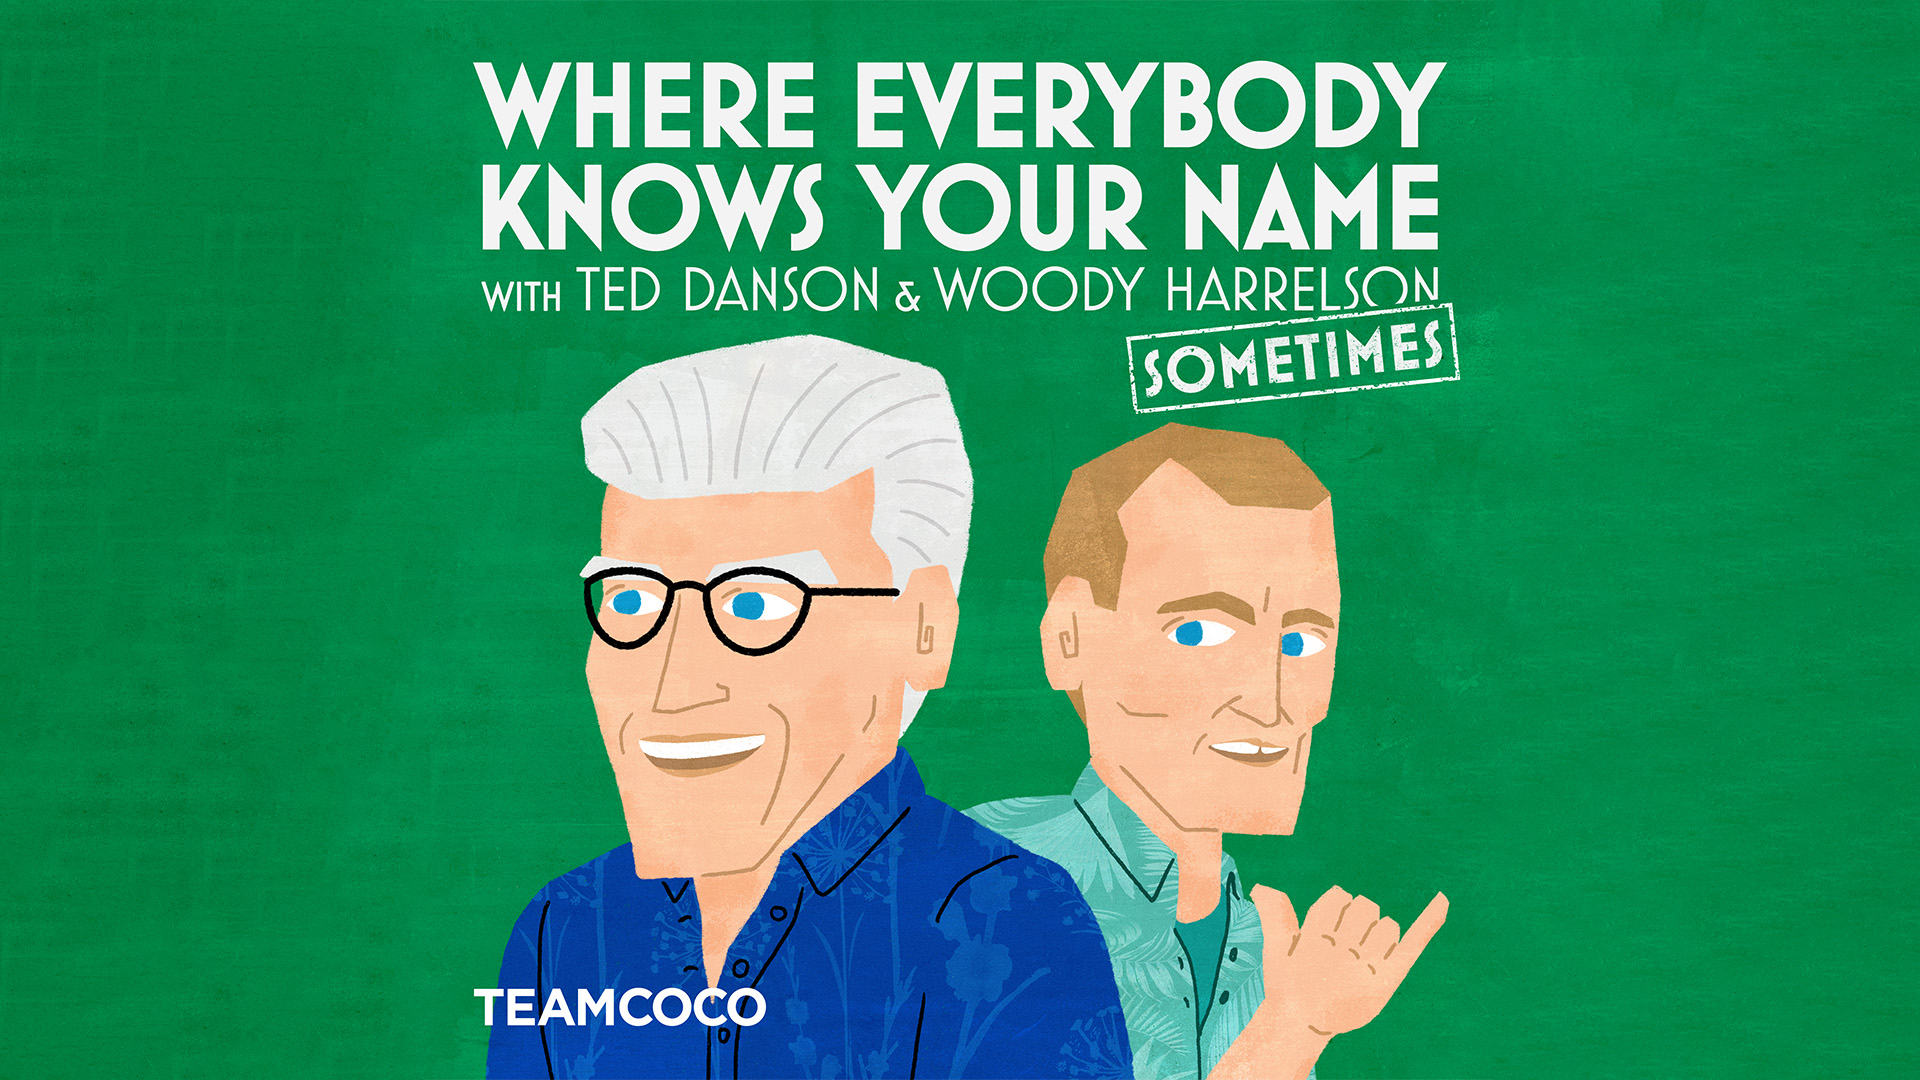 Where Everybody Knows Your Name with Ted Danson and Woody Harrelson (Sometimes)